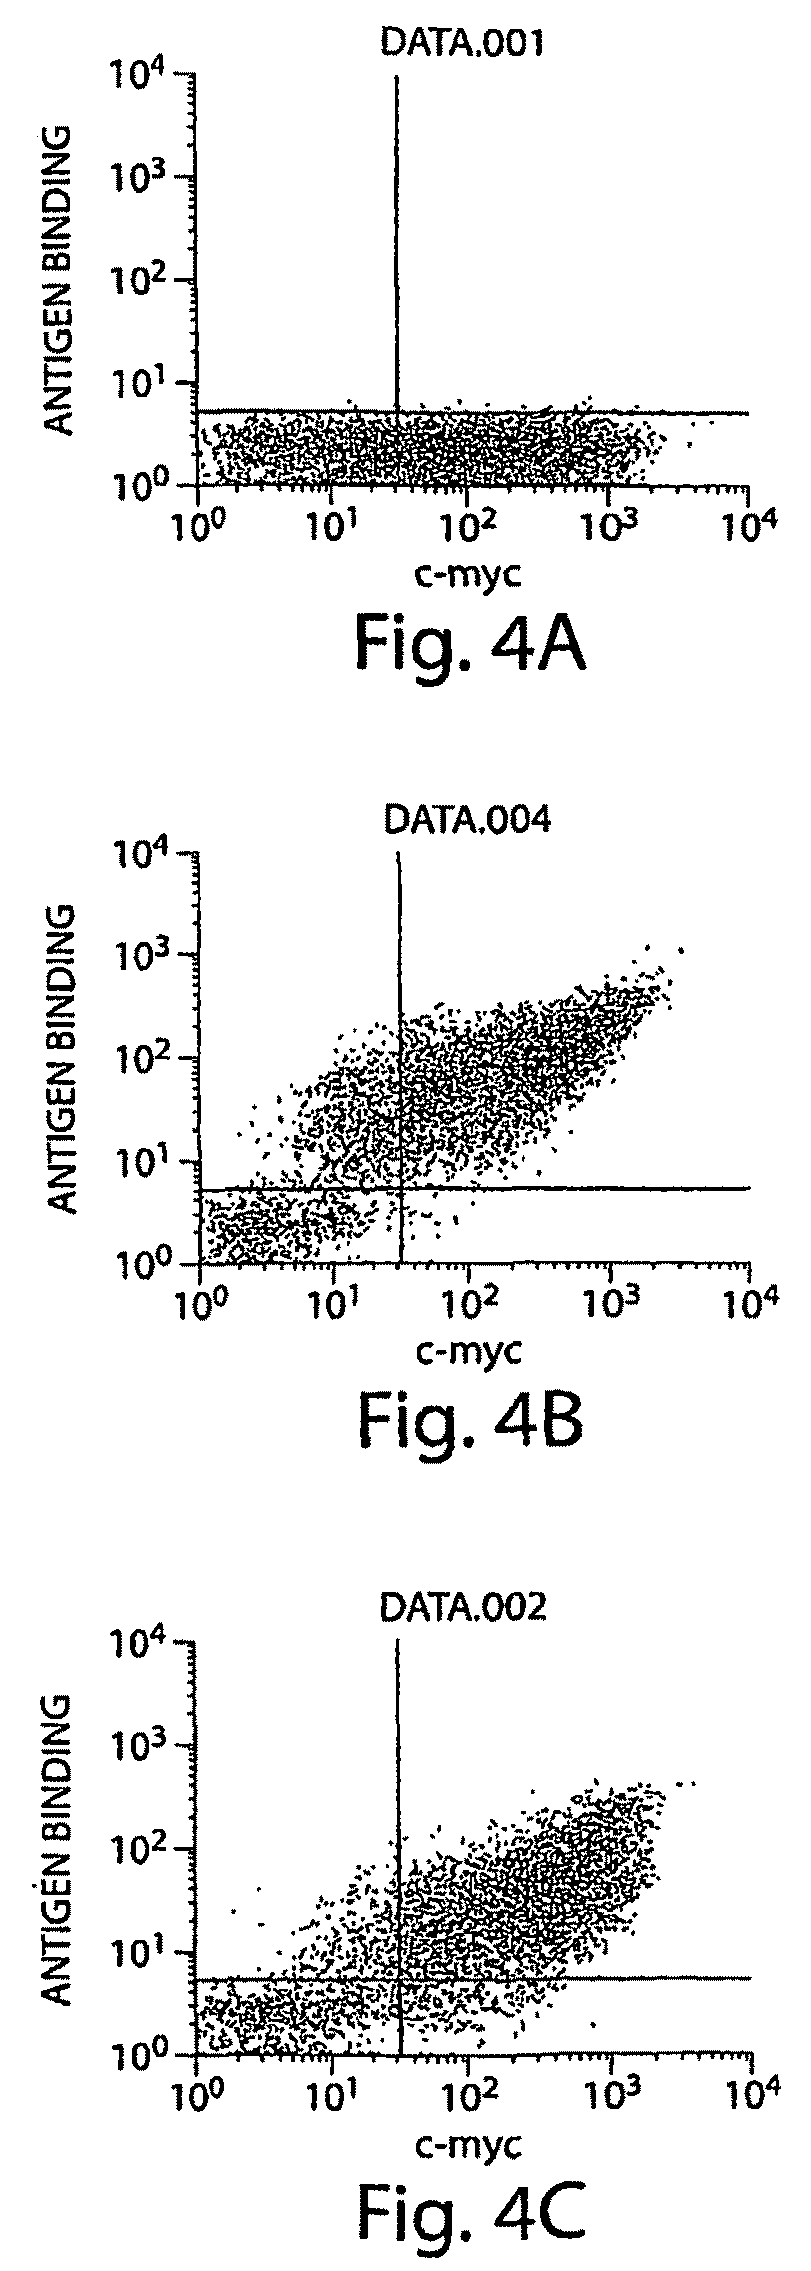 Isolated monoclonal antibody or antigen-binding fragment that cleaves octanoylated native ghrelin